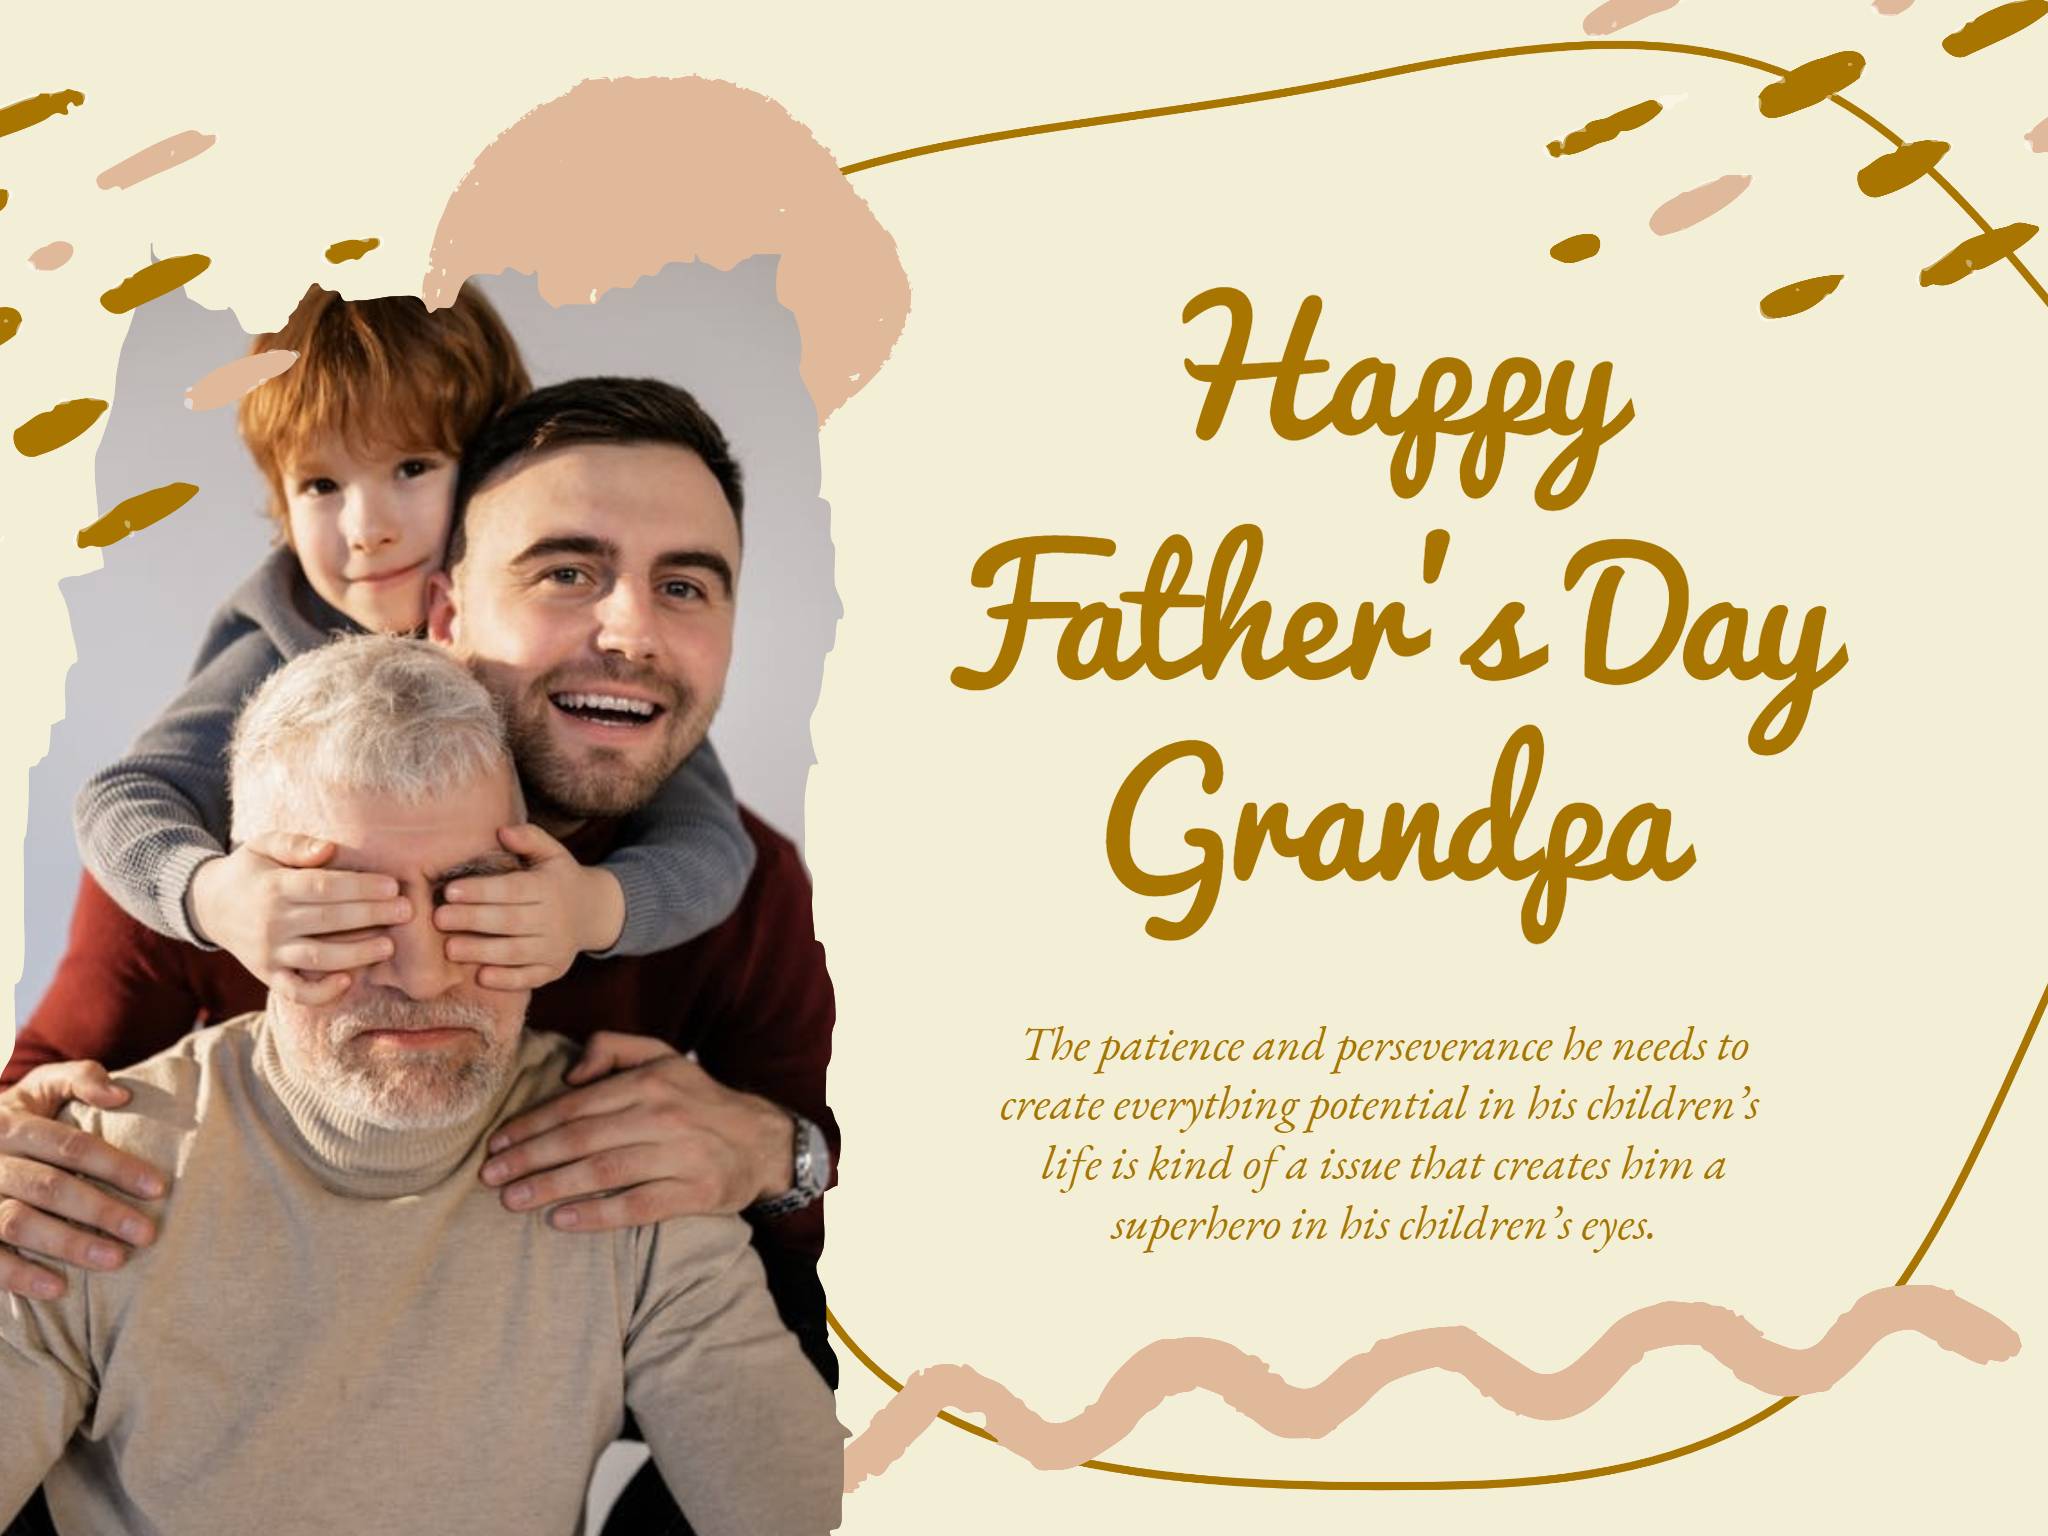 inspirational fathers day message card template of a man a kid and a old man